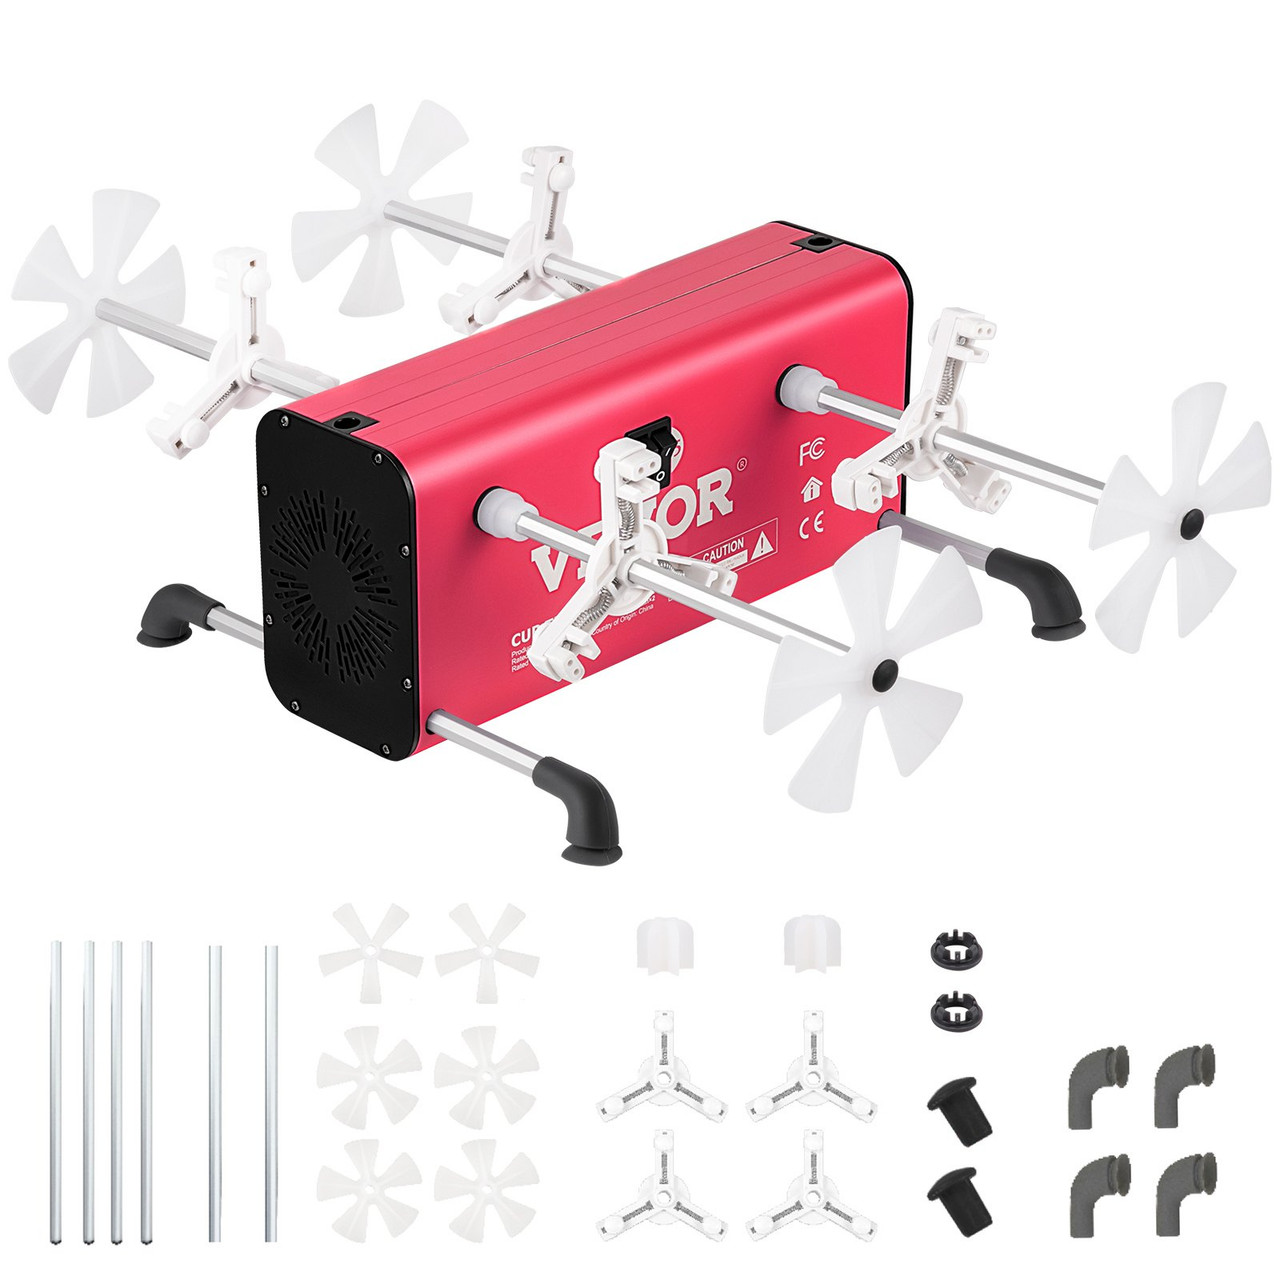 4 Cup Turner, 2 Speeds Multiple Tumbler Spinner Rotator Machine Kit with 4 Removable and Adjustable Arms, Mute Motor, Aluminum Alloy Frame, 4 Independent Switches for DIY Glitter Crafts(Red)